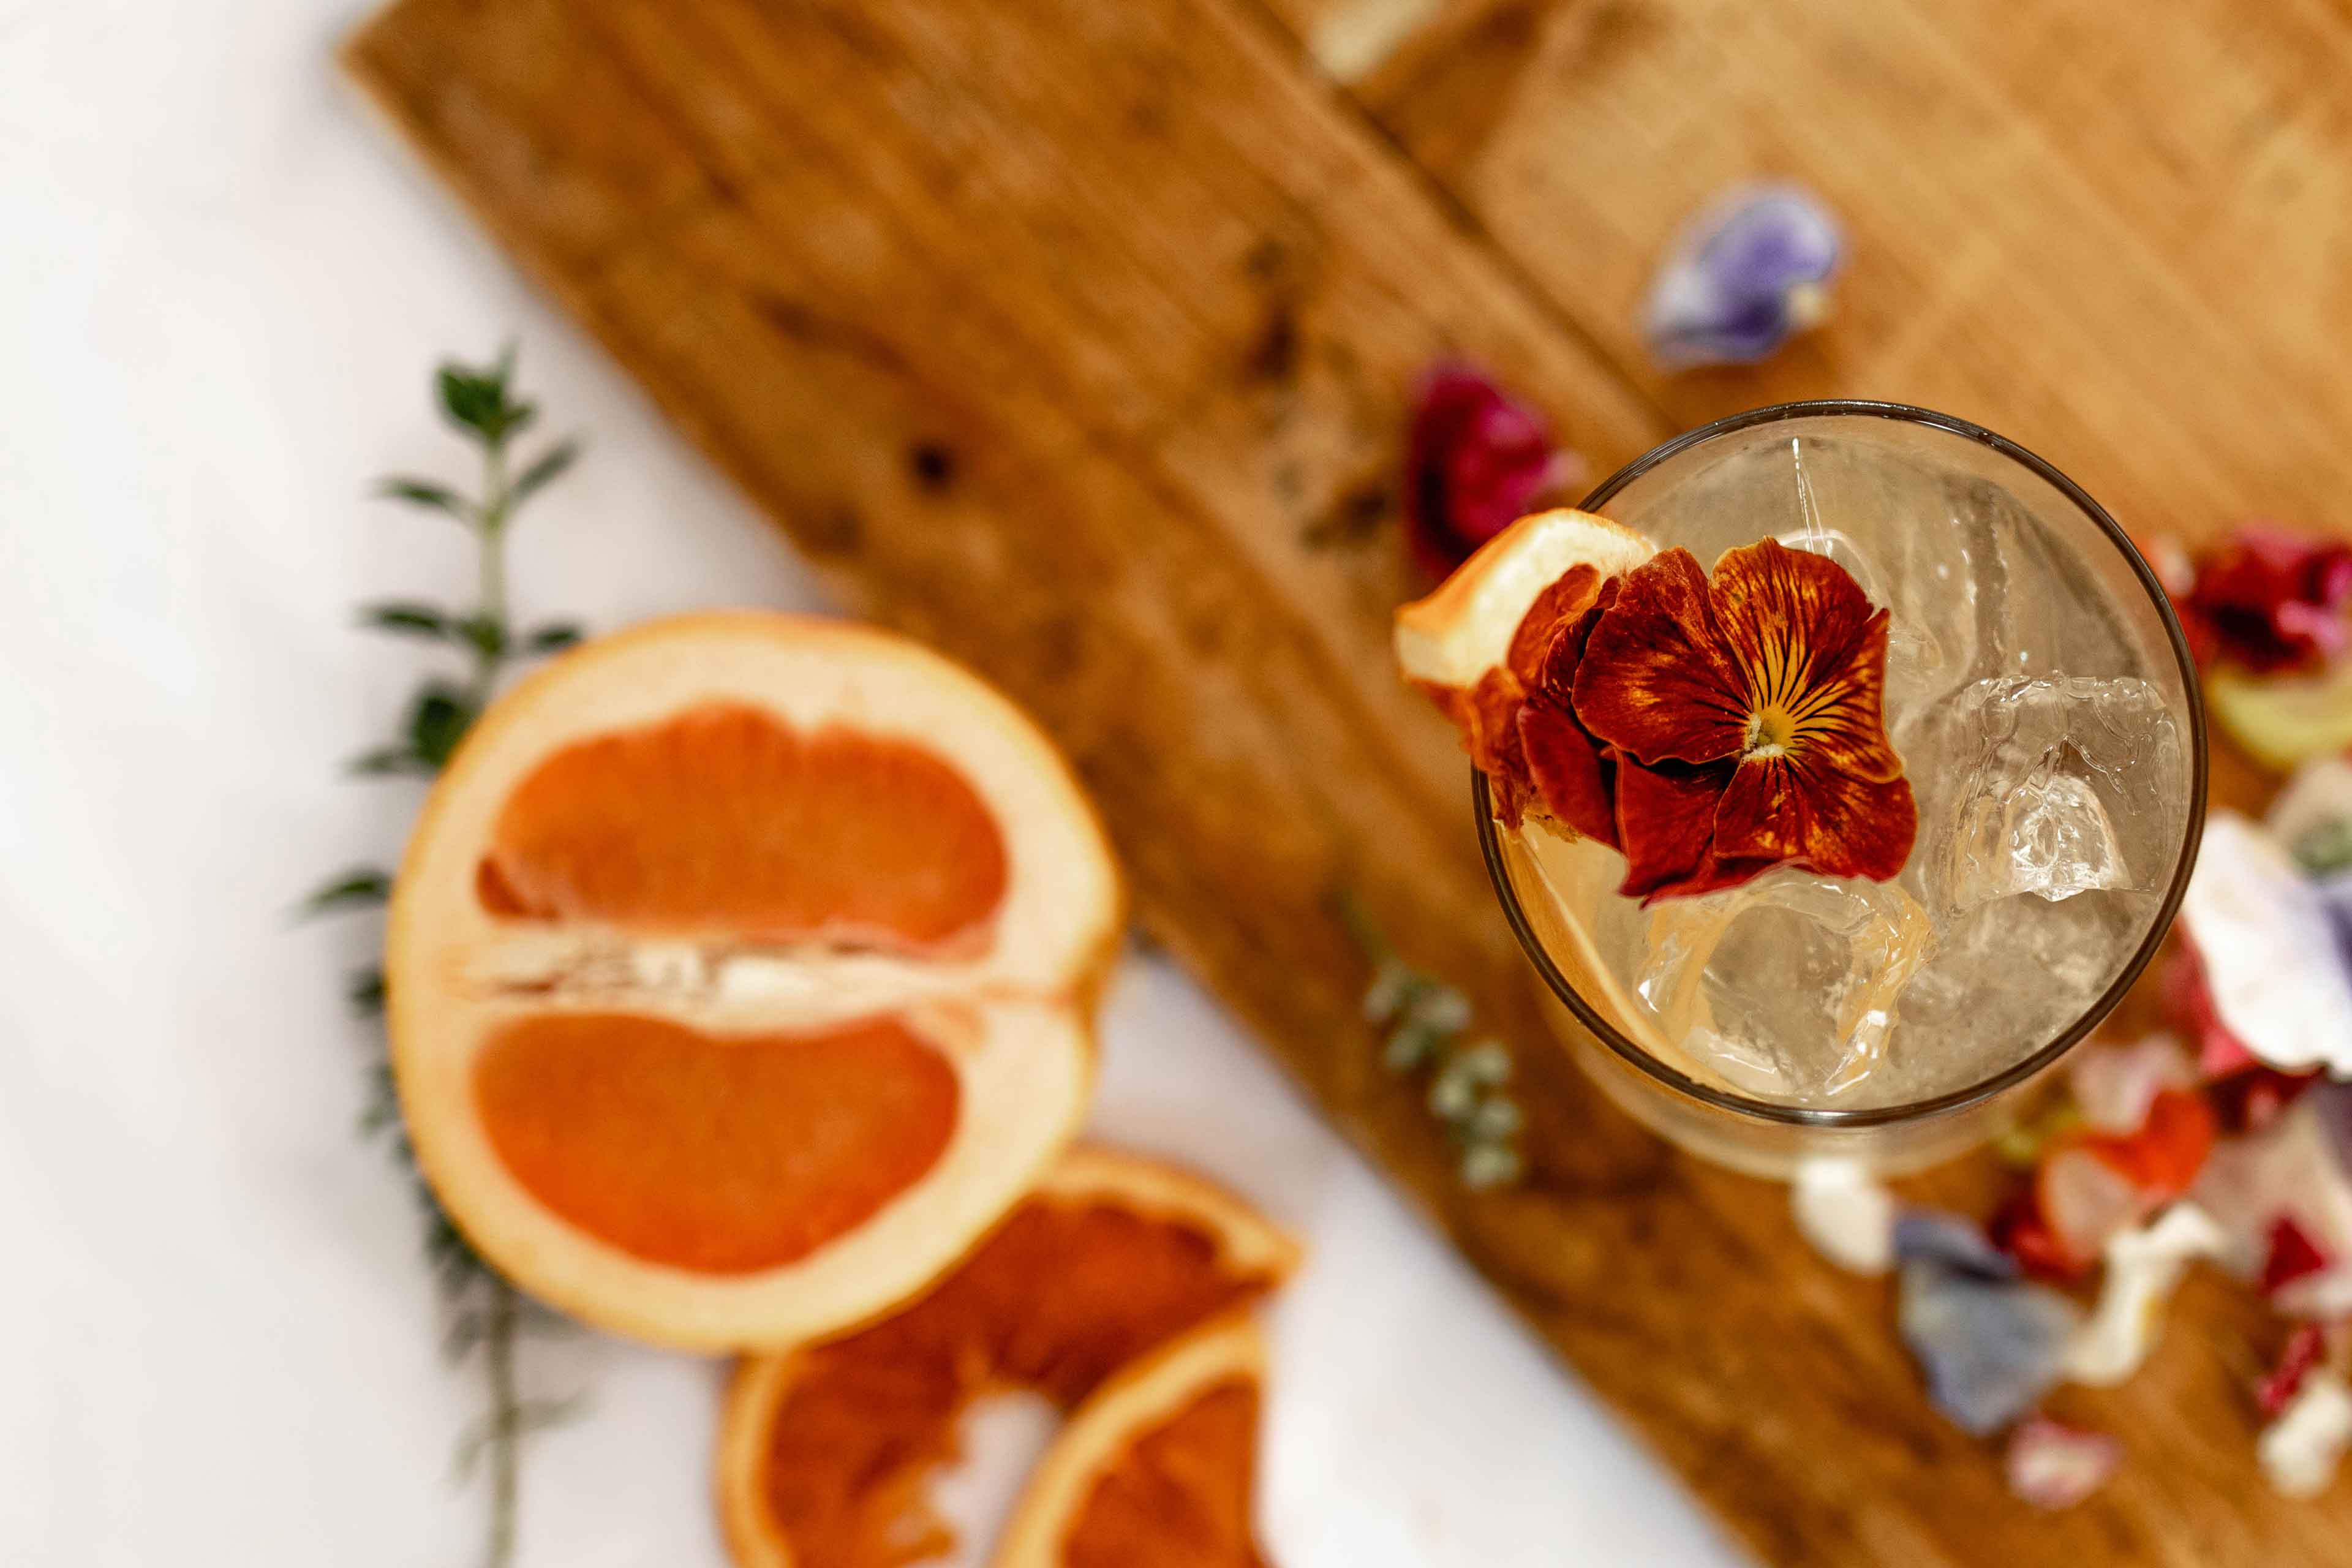 cocktail served on a wood table with some orange as garnish c